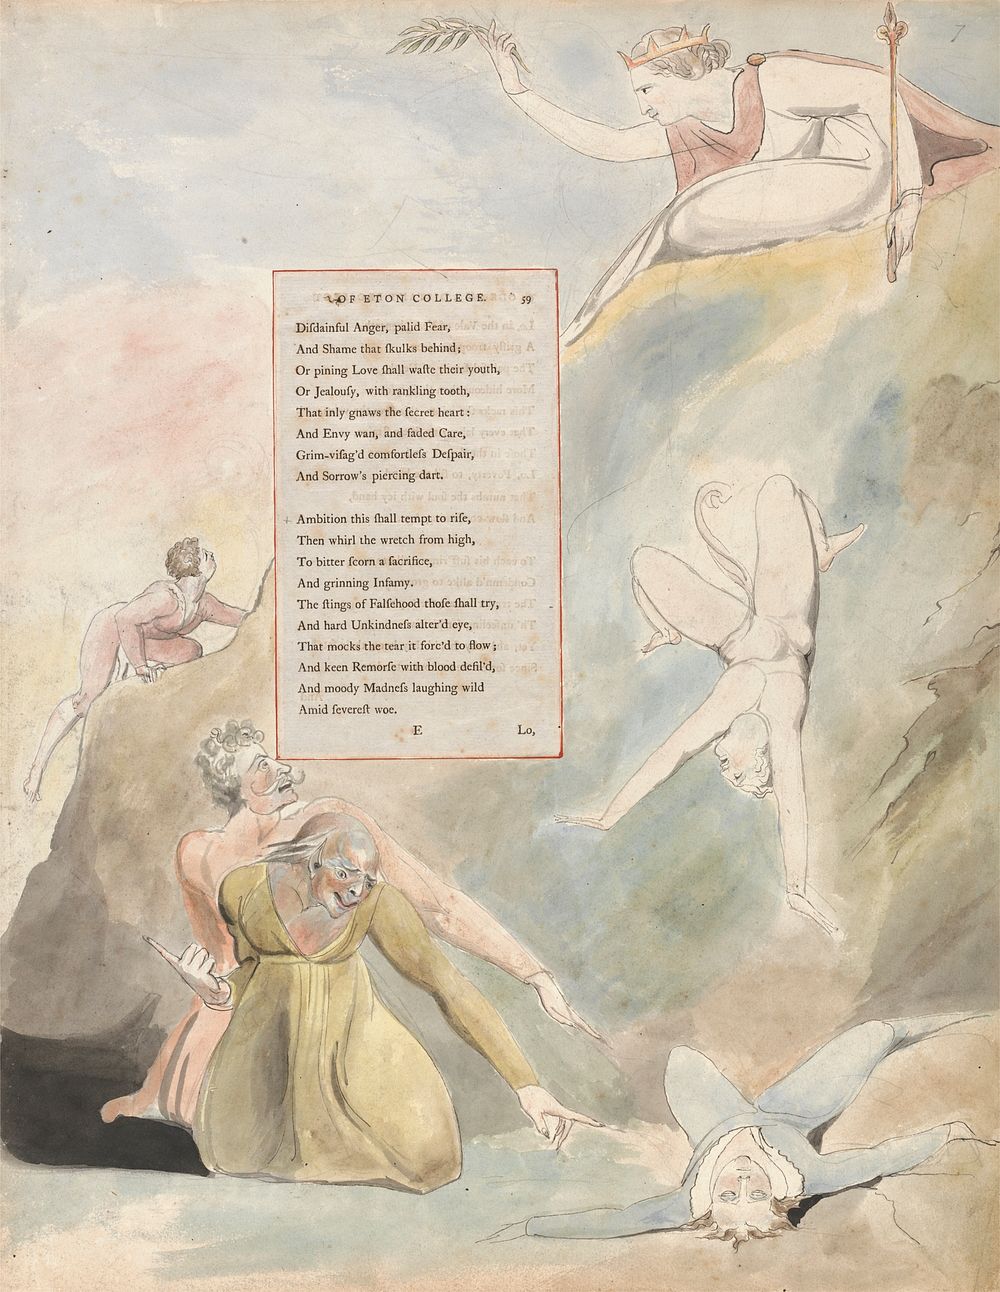 The Poems of Thomas Gray, Design 19, "Ode on a Distant Prospect of Eton College." by William Blake. Original public domain…